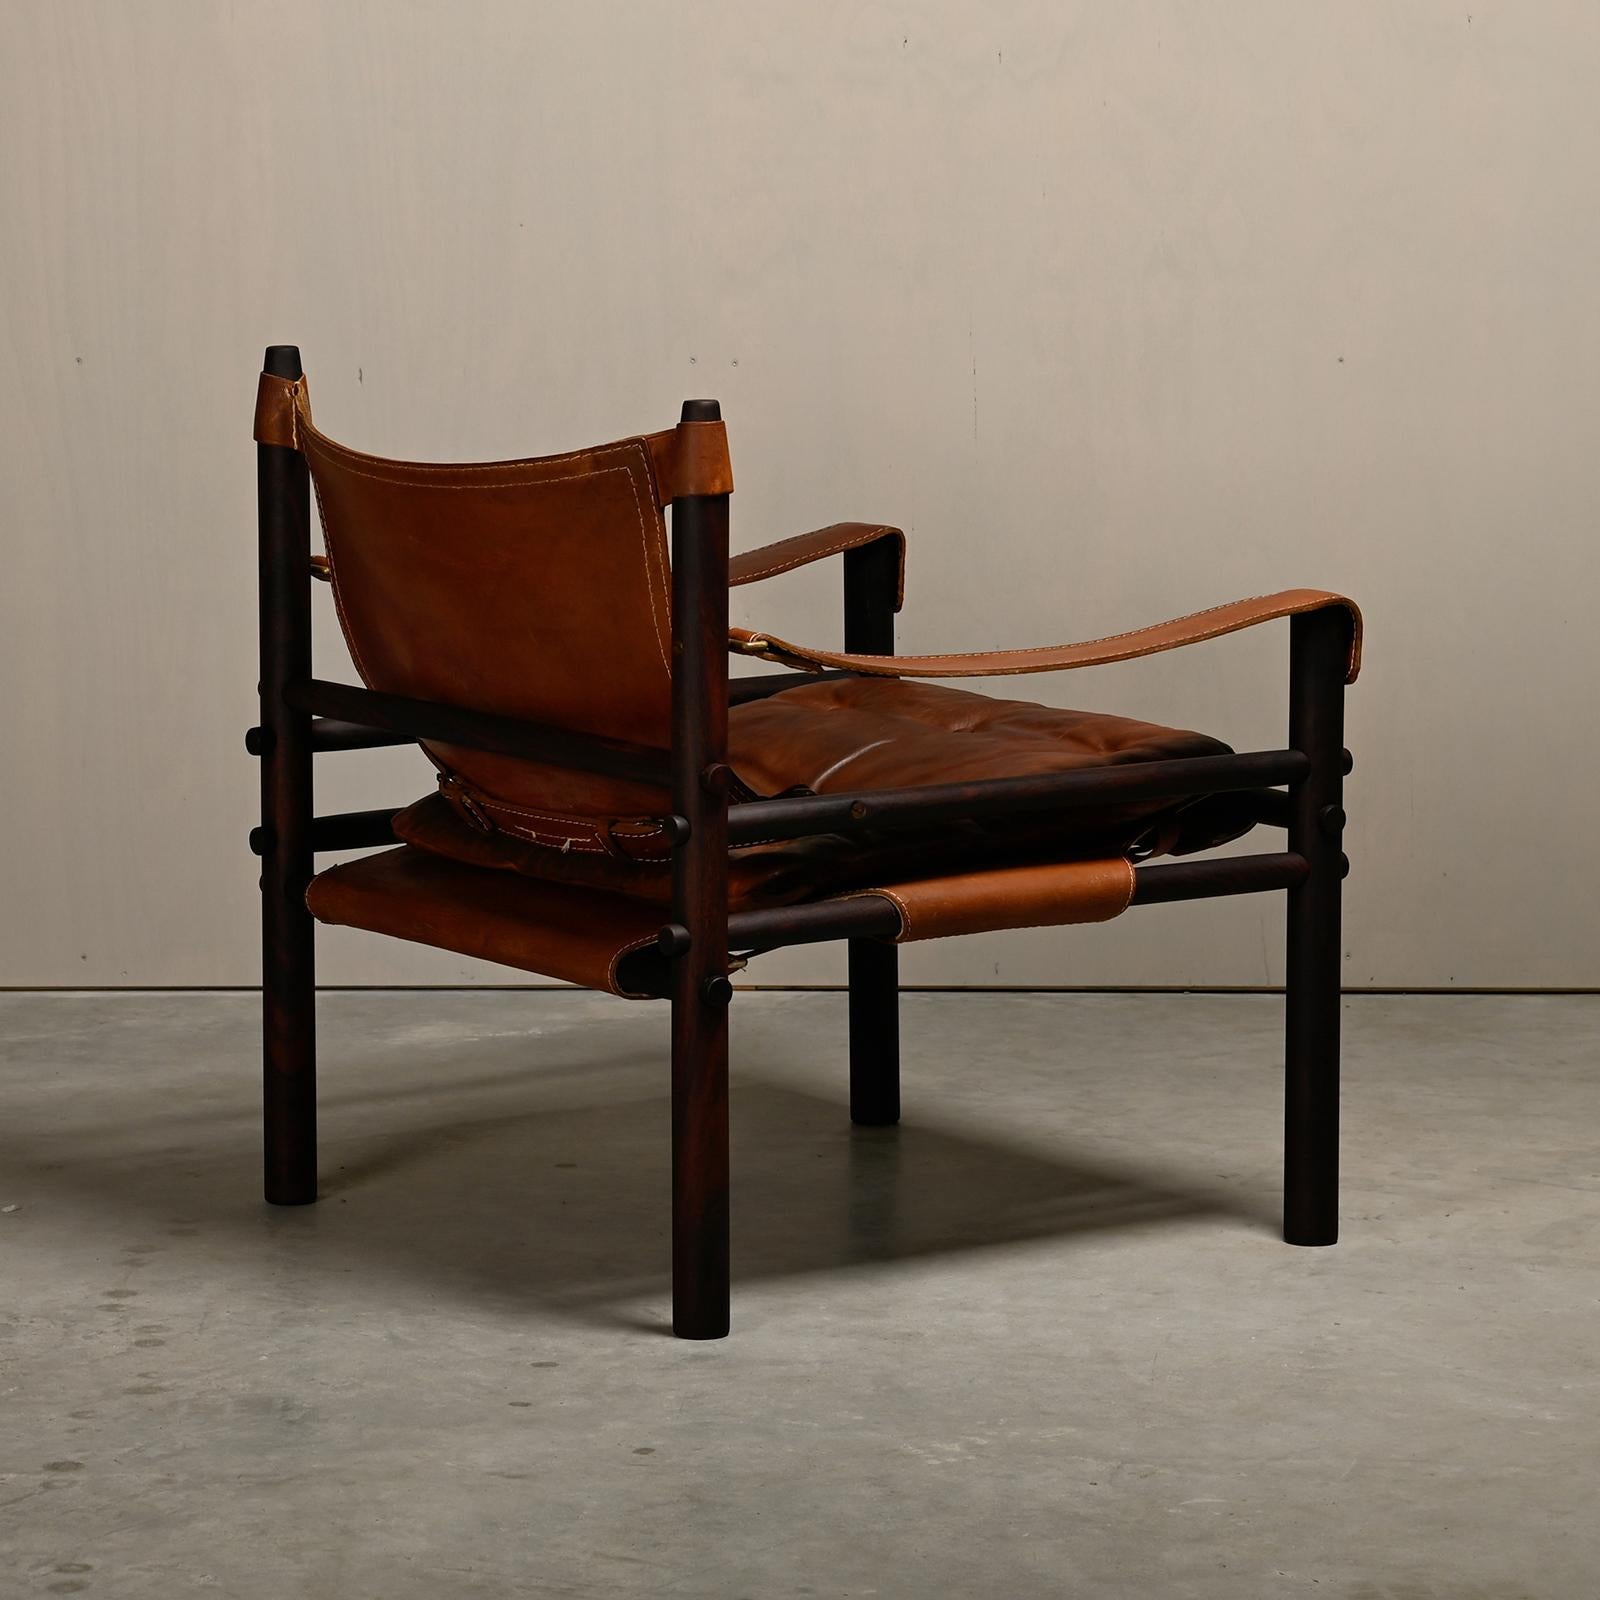 Mid-20th Century Arne Norell Sirocco Safari Lounge Chair in dark brown wood and leather, Sweden For Sale